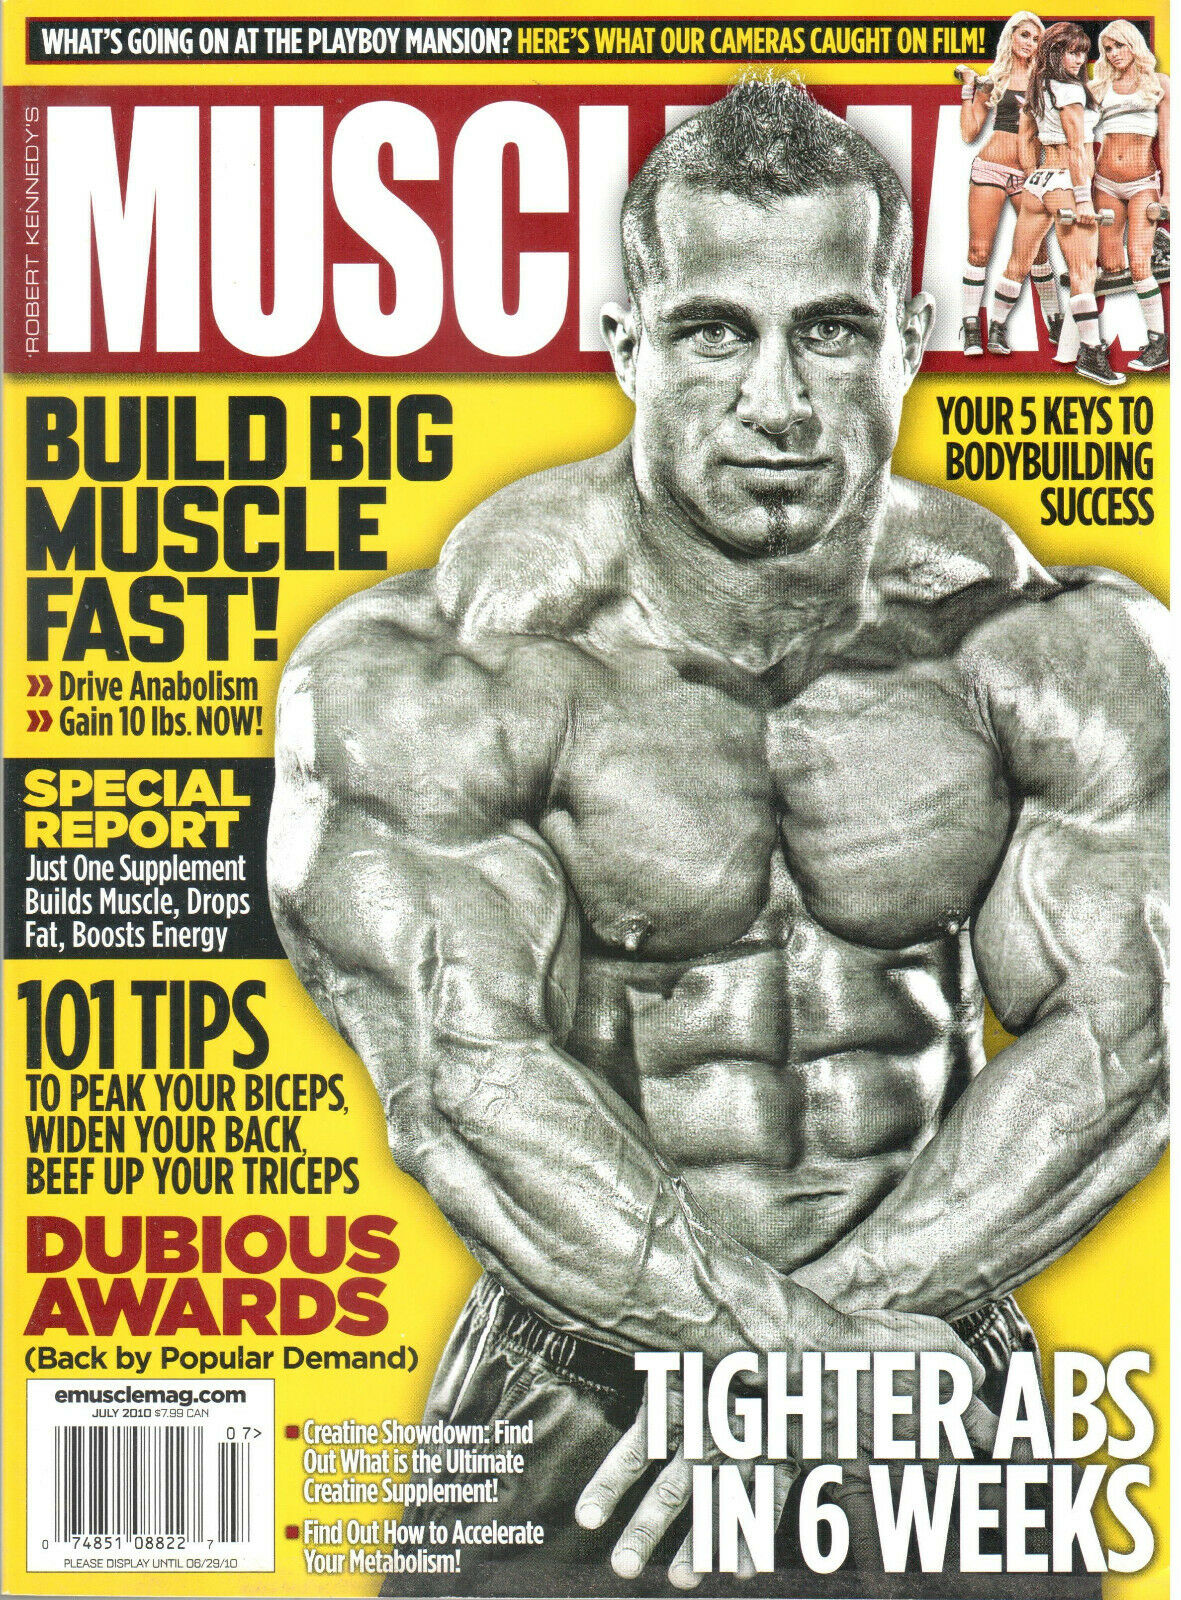 Muscle Mag July 2010 magazine back issue Muscle Mag magizine back copy Muscle Mag July 2010 Bodybuilding and Fitness Magazine Back Issue Published by Canadian Robert Kennedy and Founded in 1974. What's Going On At The Playboy Mansion? Here's What Our Cameras Caught On Film!.